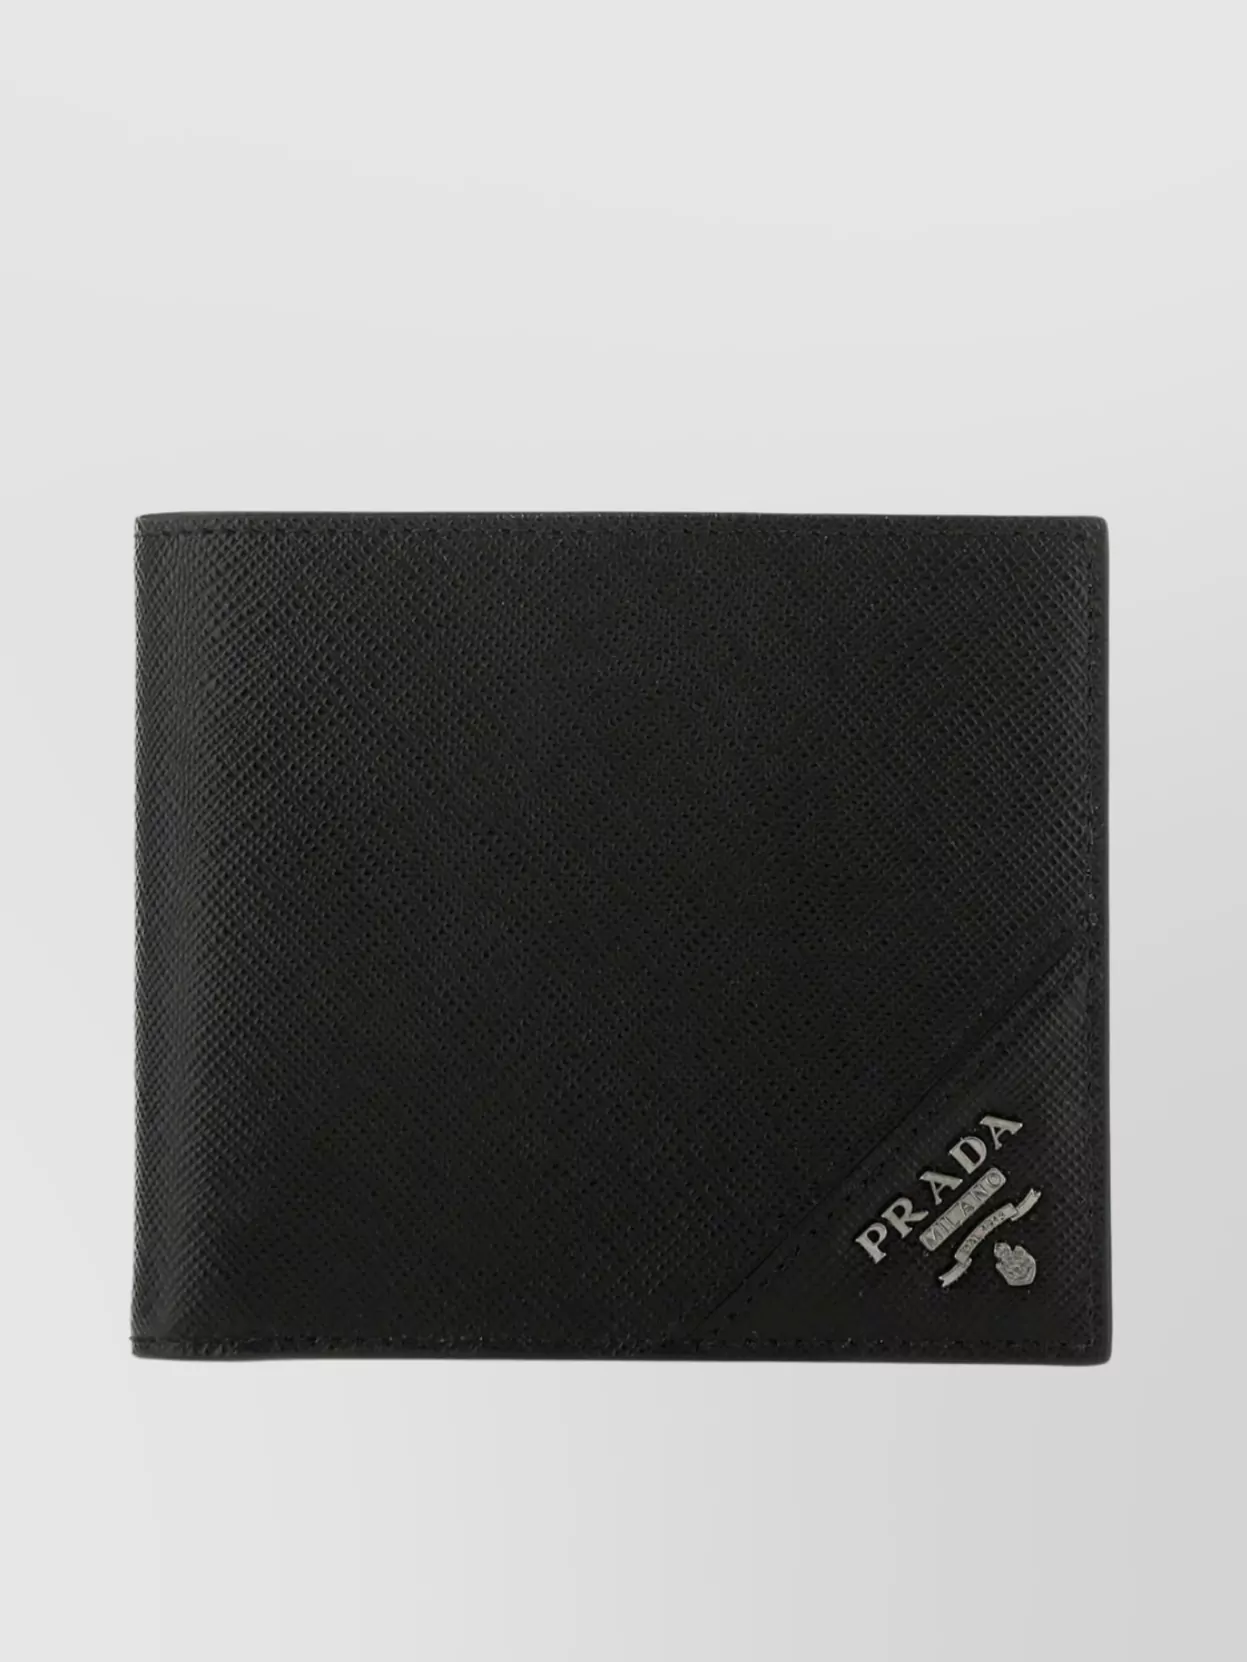 Prada Leather Wallet With Bi-fold Design And Textured Finish